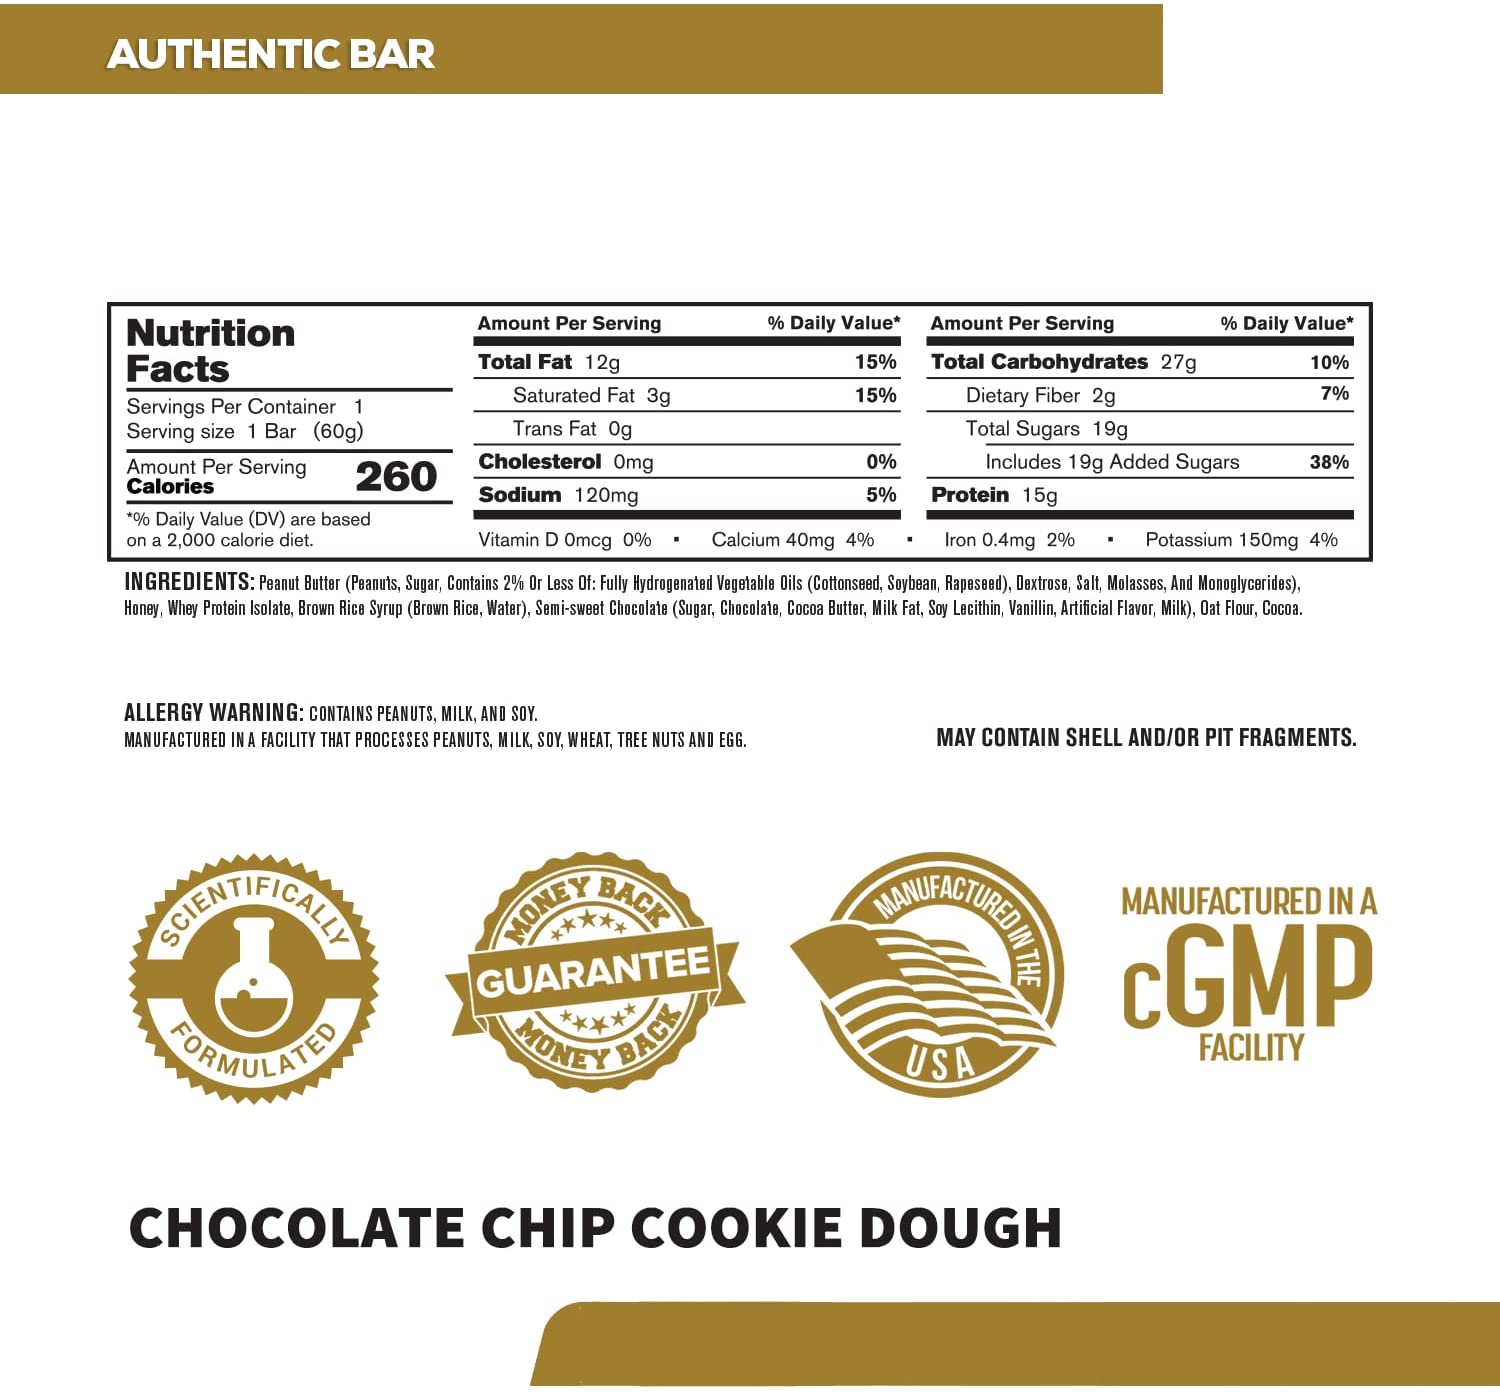 Authentic Protein Bar Chocolate Chip Cookie Dough / 60g